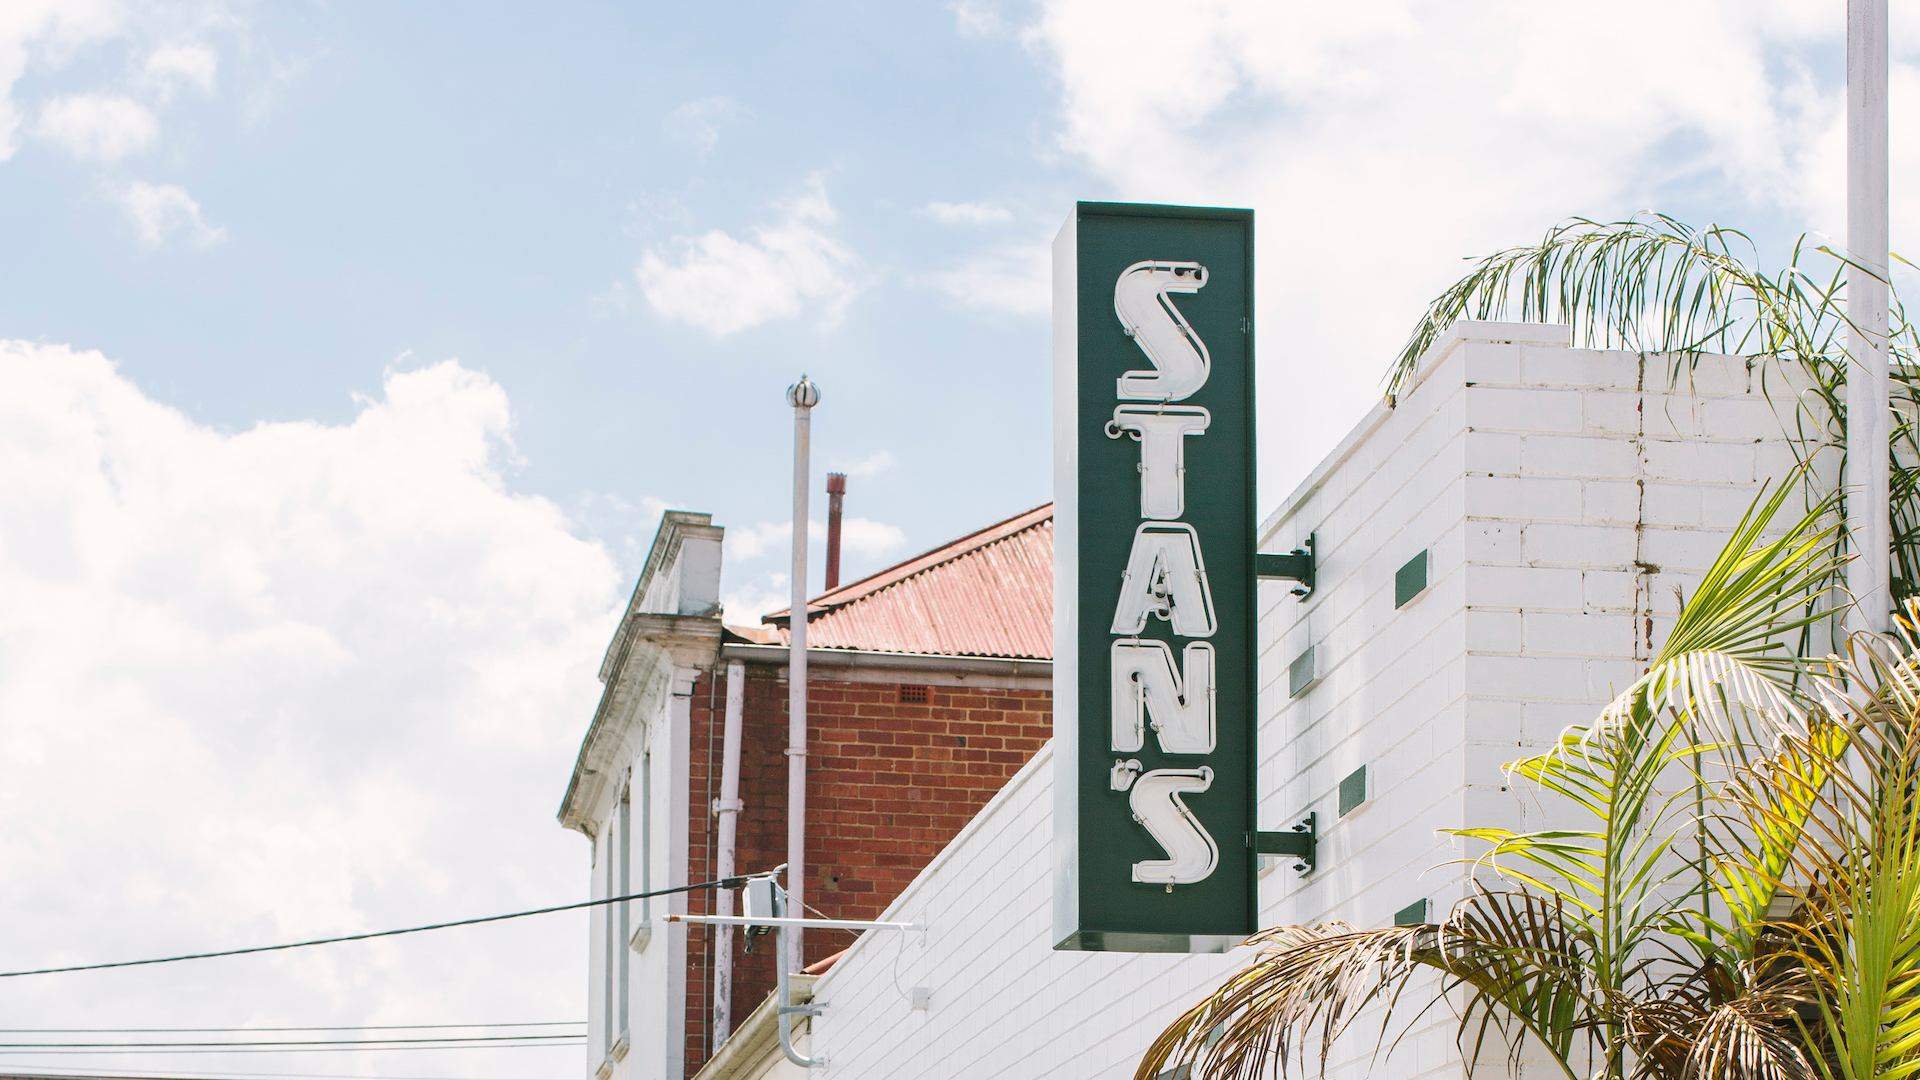 Stan's Deli & Sandwiches Is Malvern's New Modern Take on the Classic American Diner